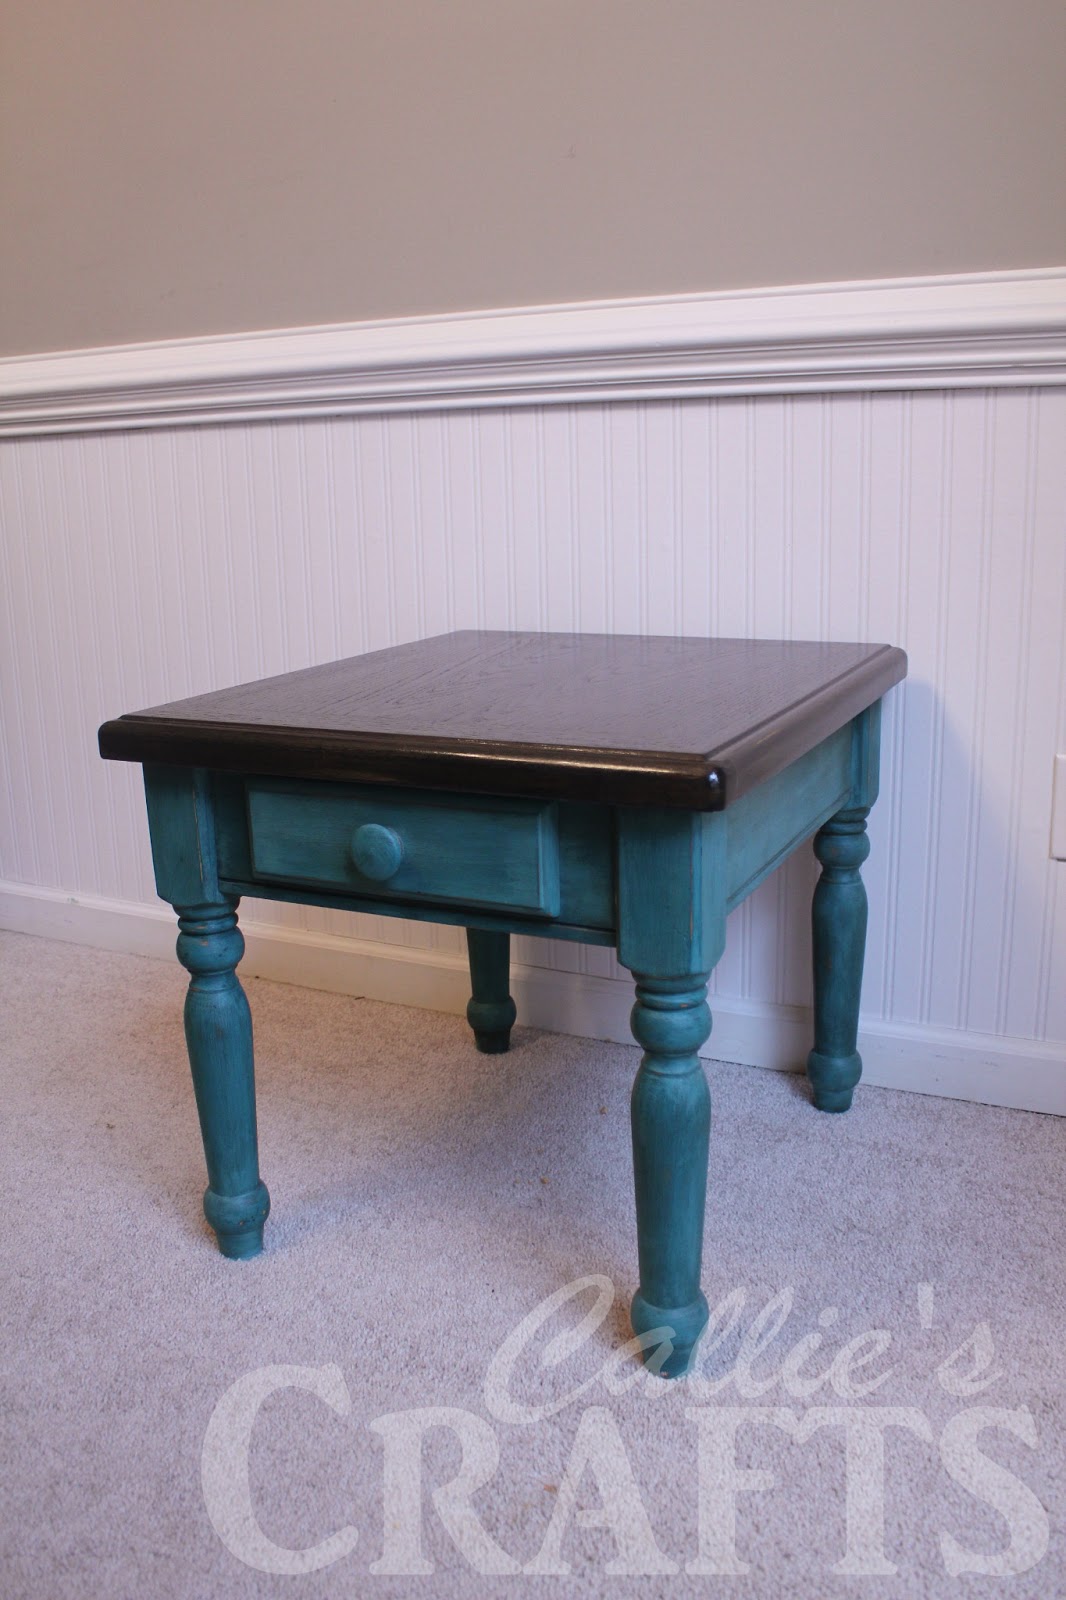 Callie's Crafts: Chalk Paint End Table (update)